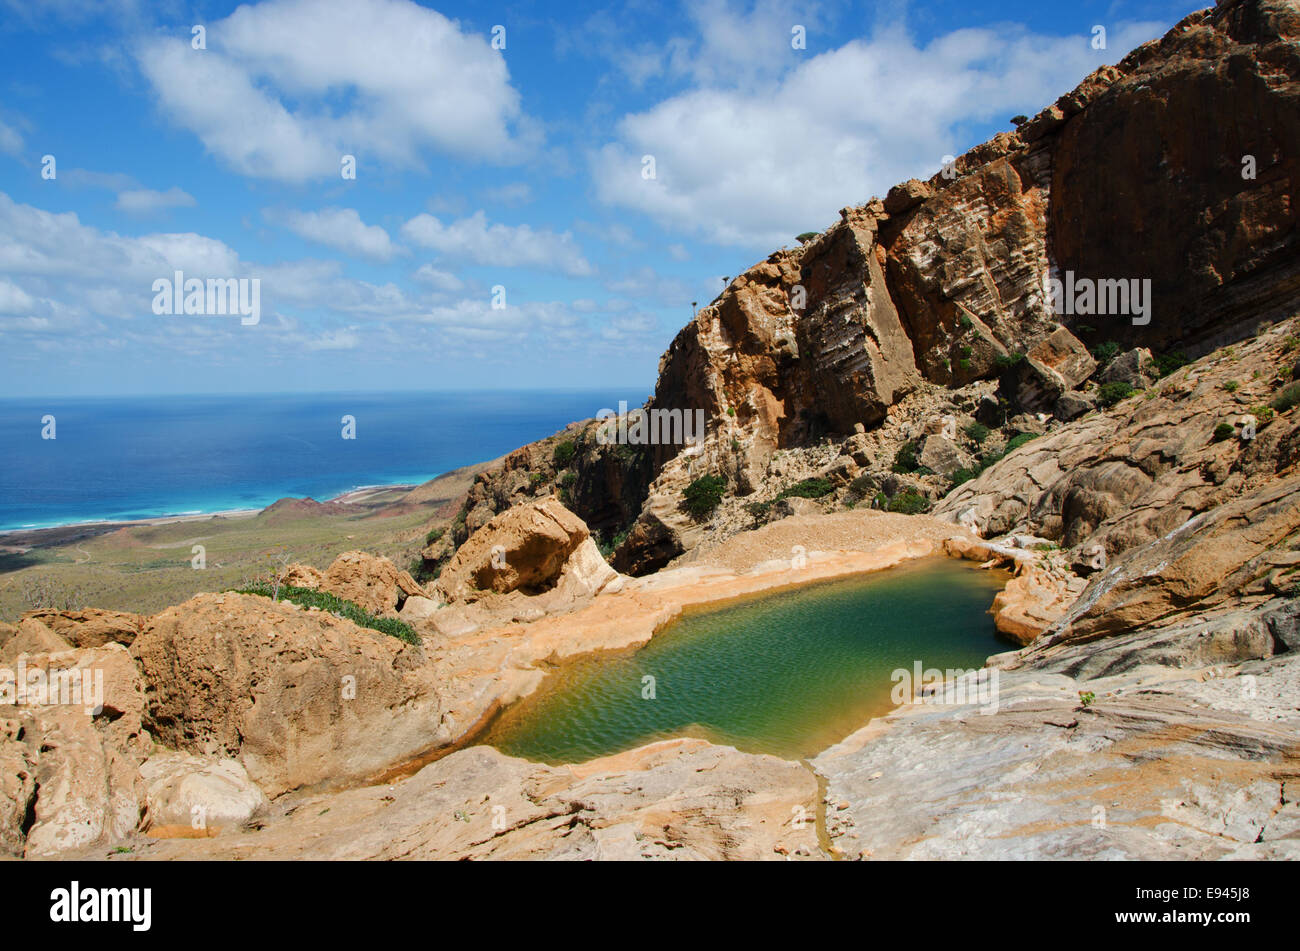 Socotra, Yemen: breathtaking overview from Homhil Plateau with the wadi, natural pool of freshwater, and the Arabian Sea Stock Photo